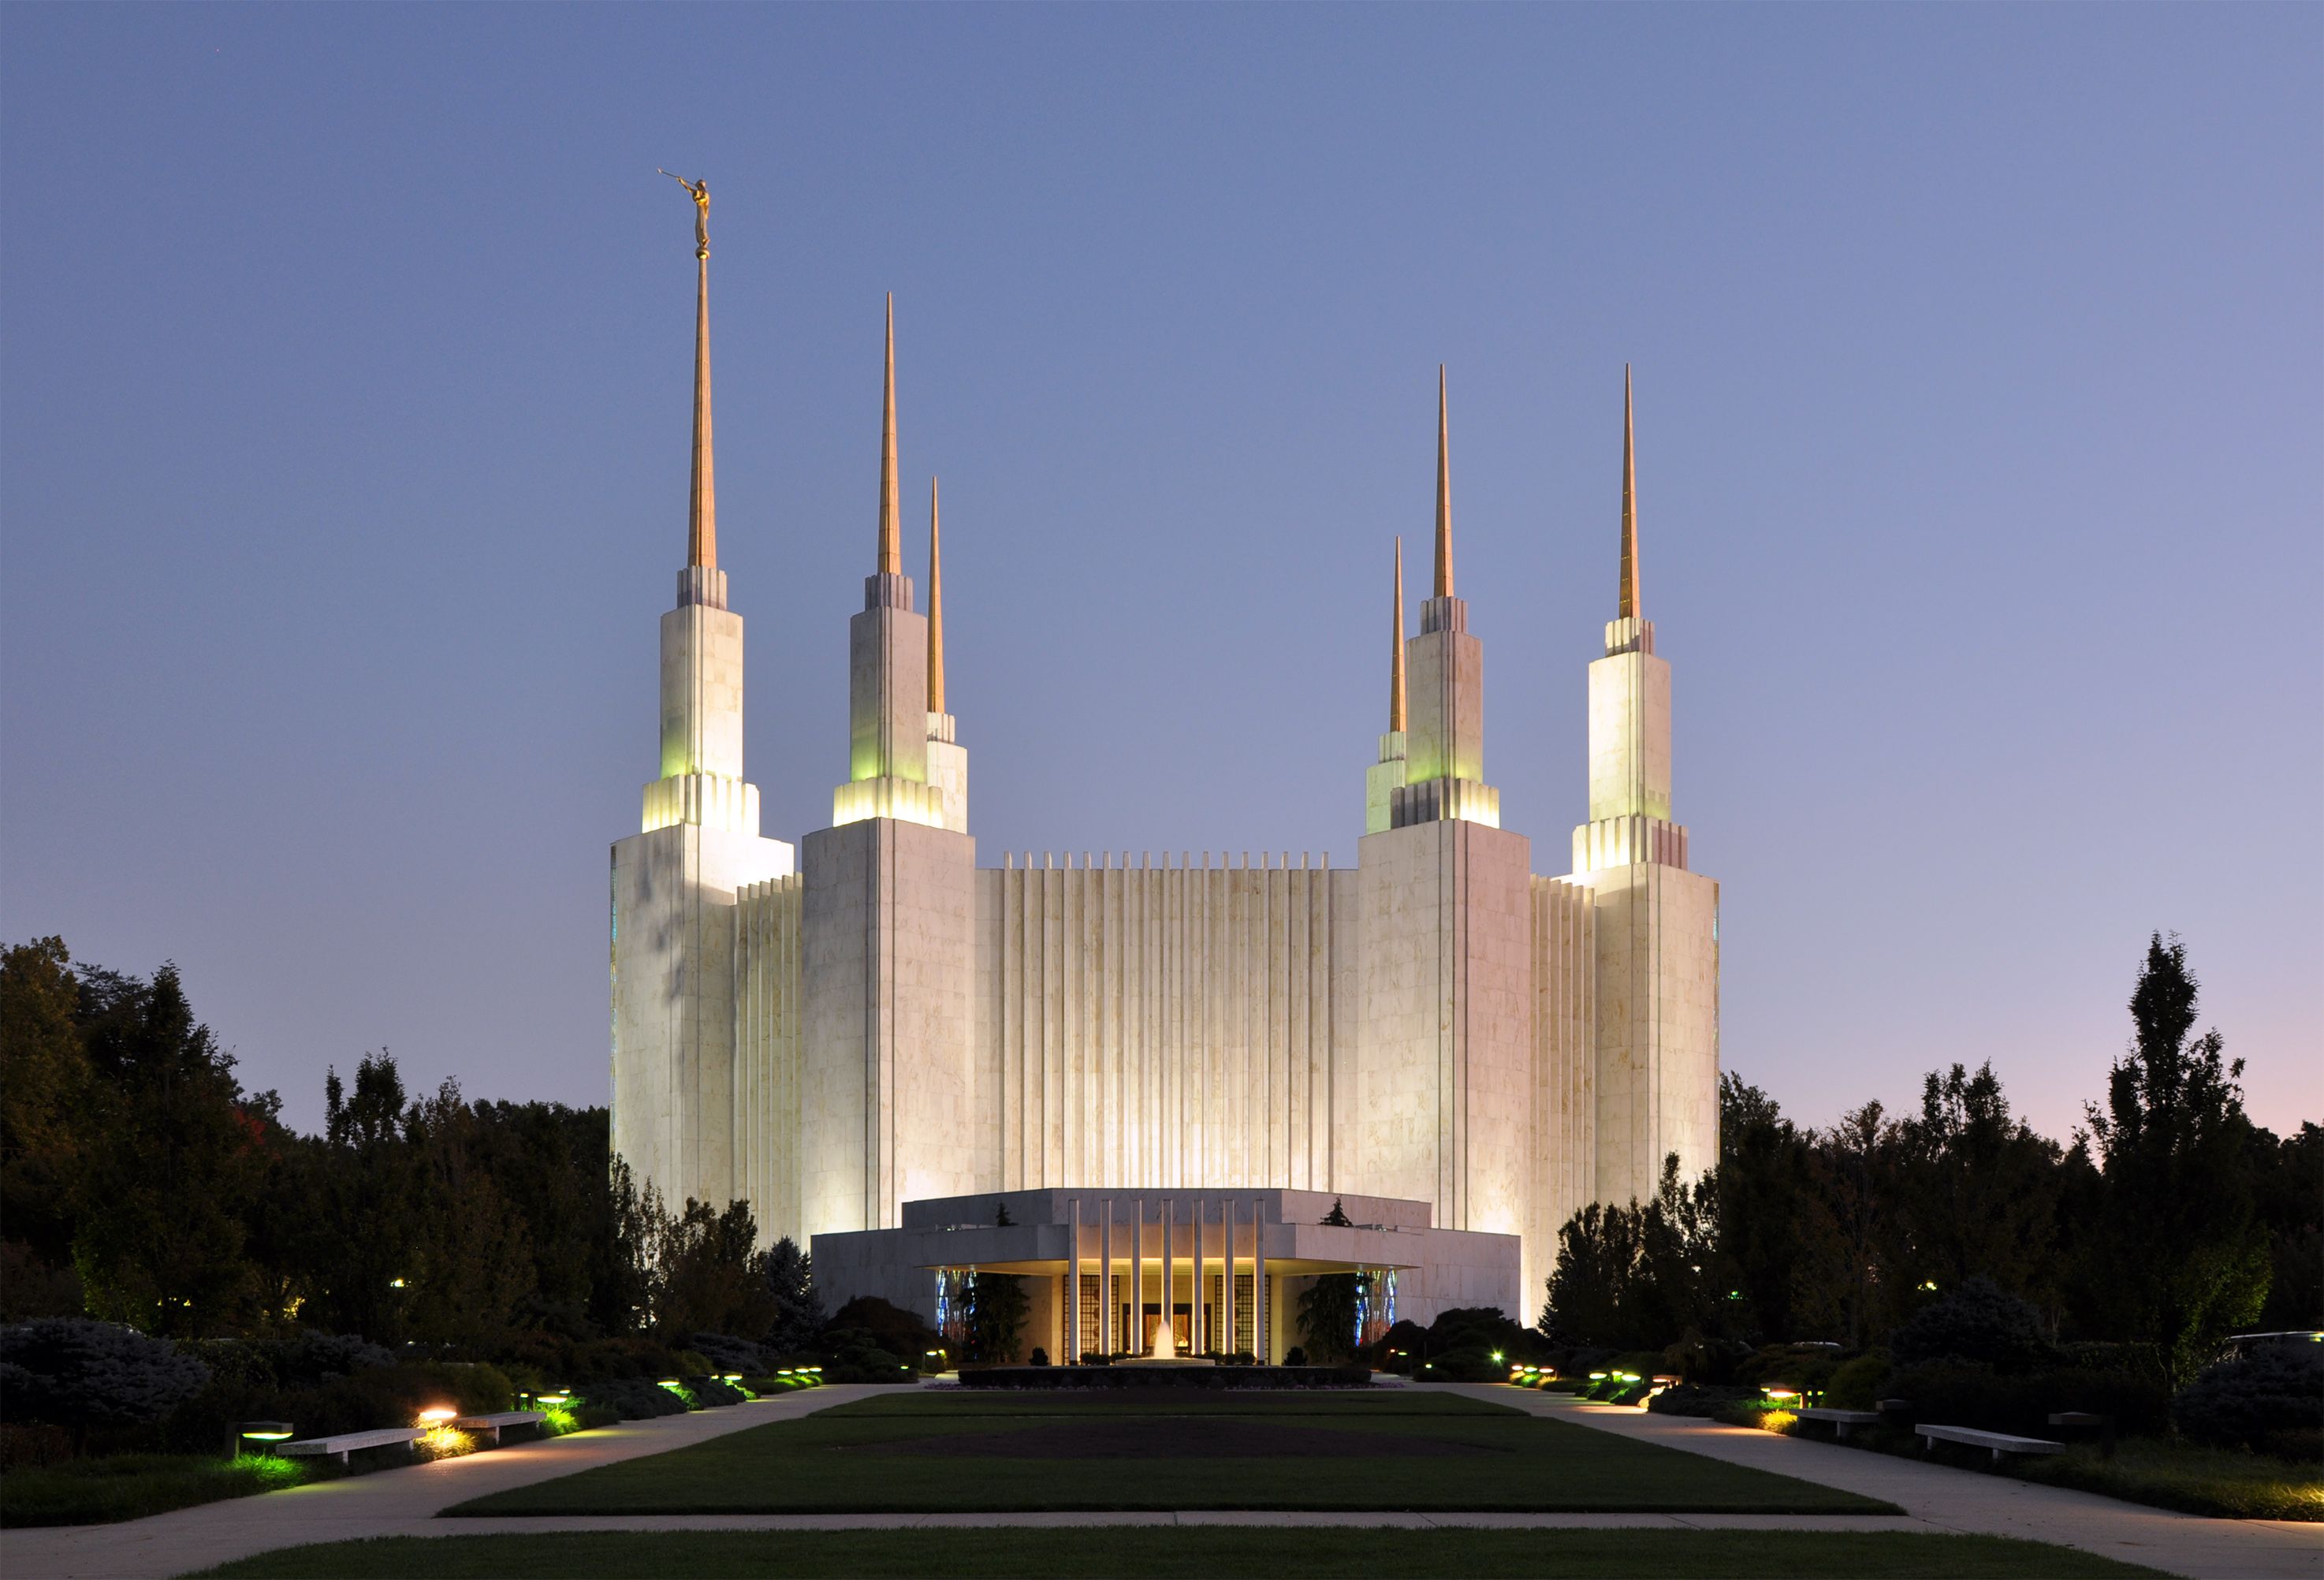 DC's Mormon Temple opening to public for the first time in decades